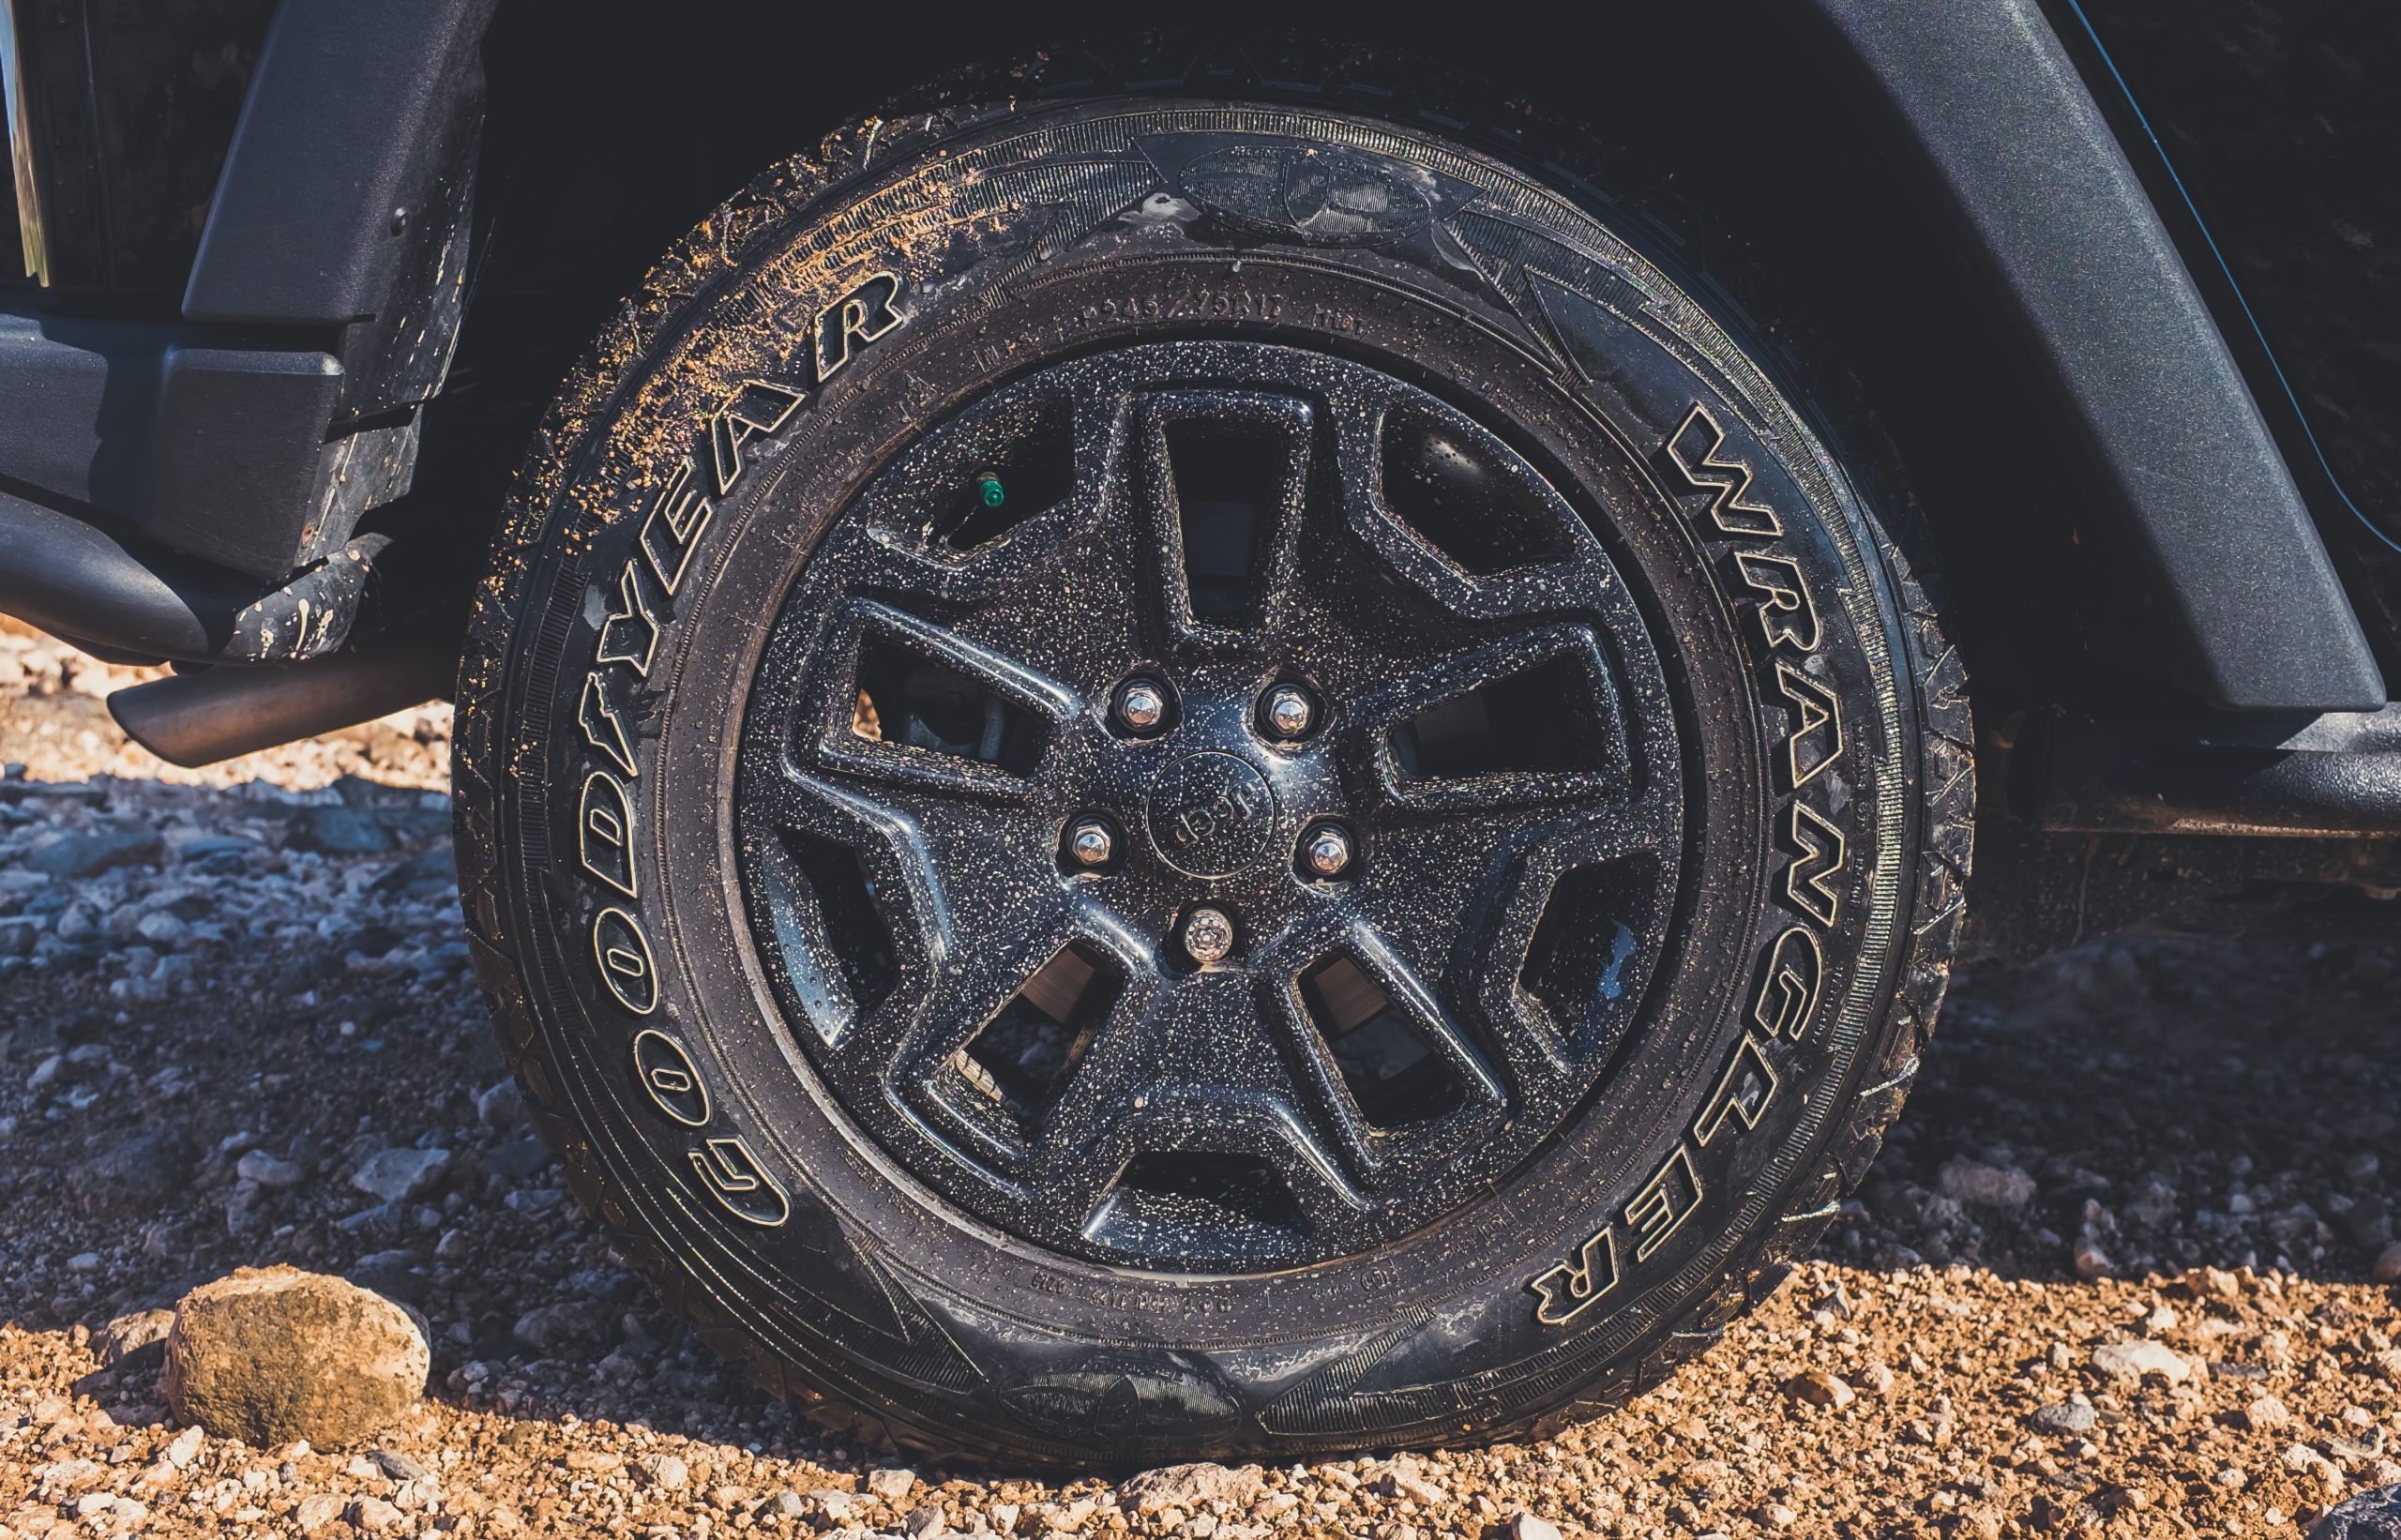 A close-up of a vehicle with flat tire on a dirt road.